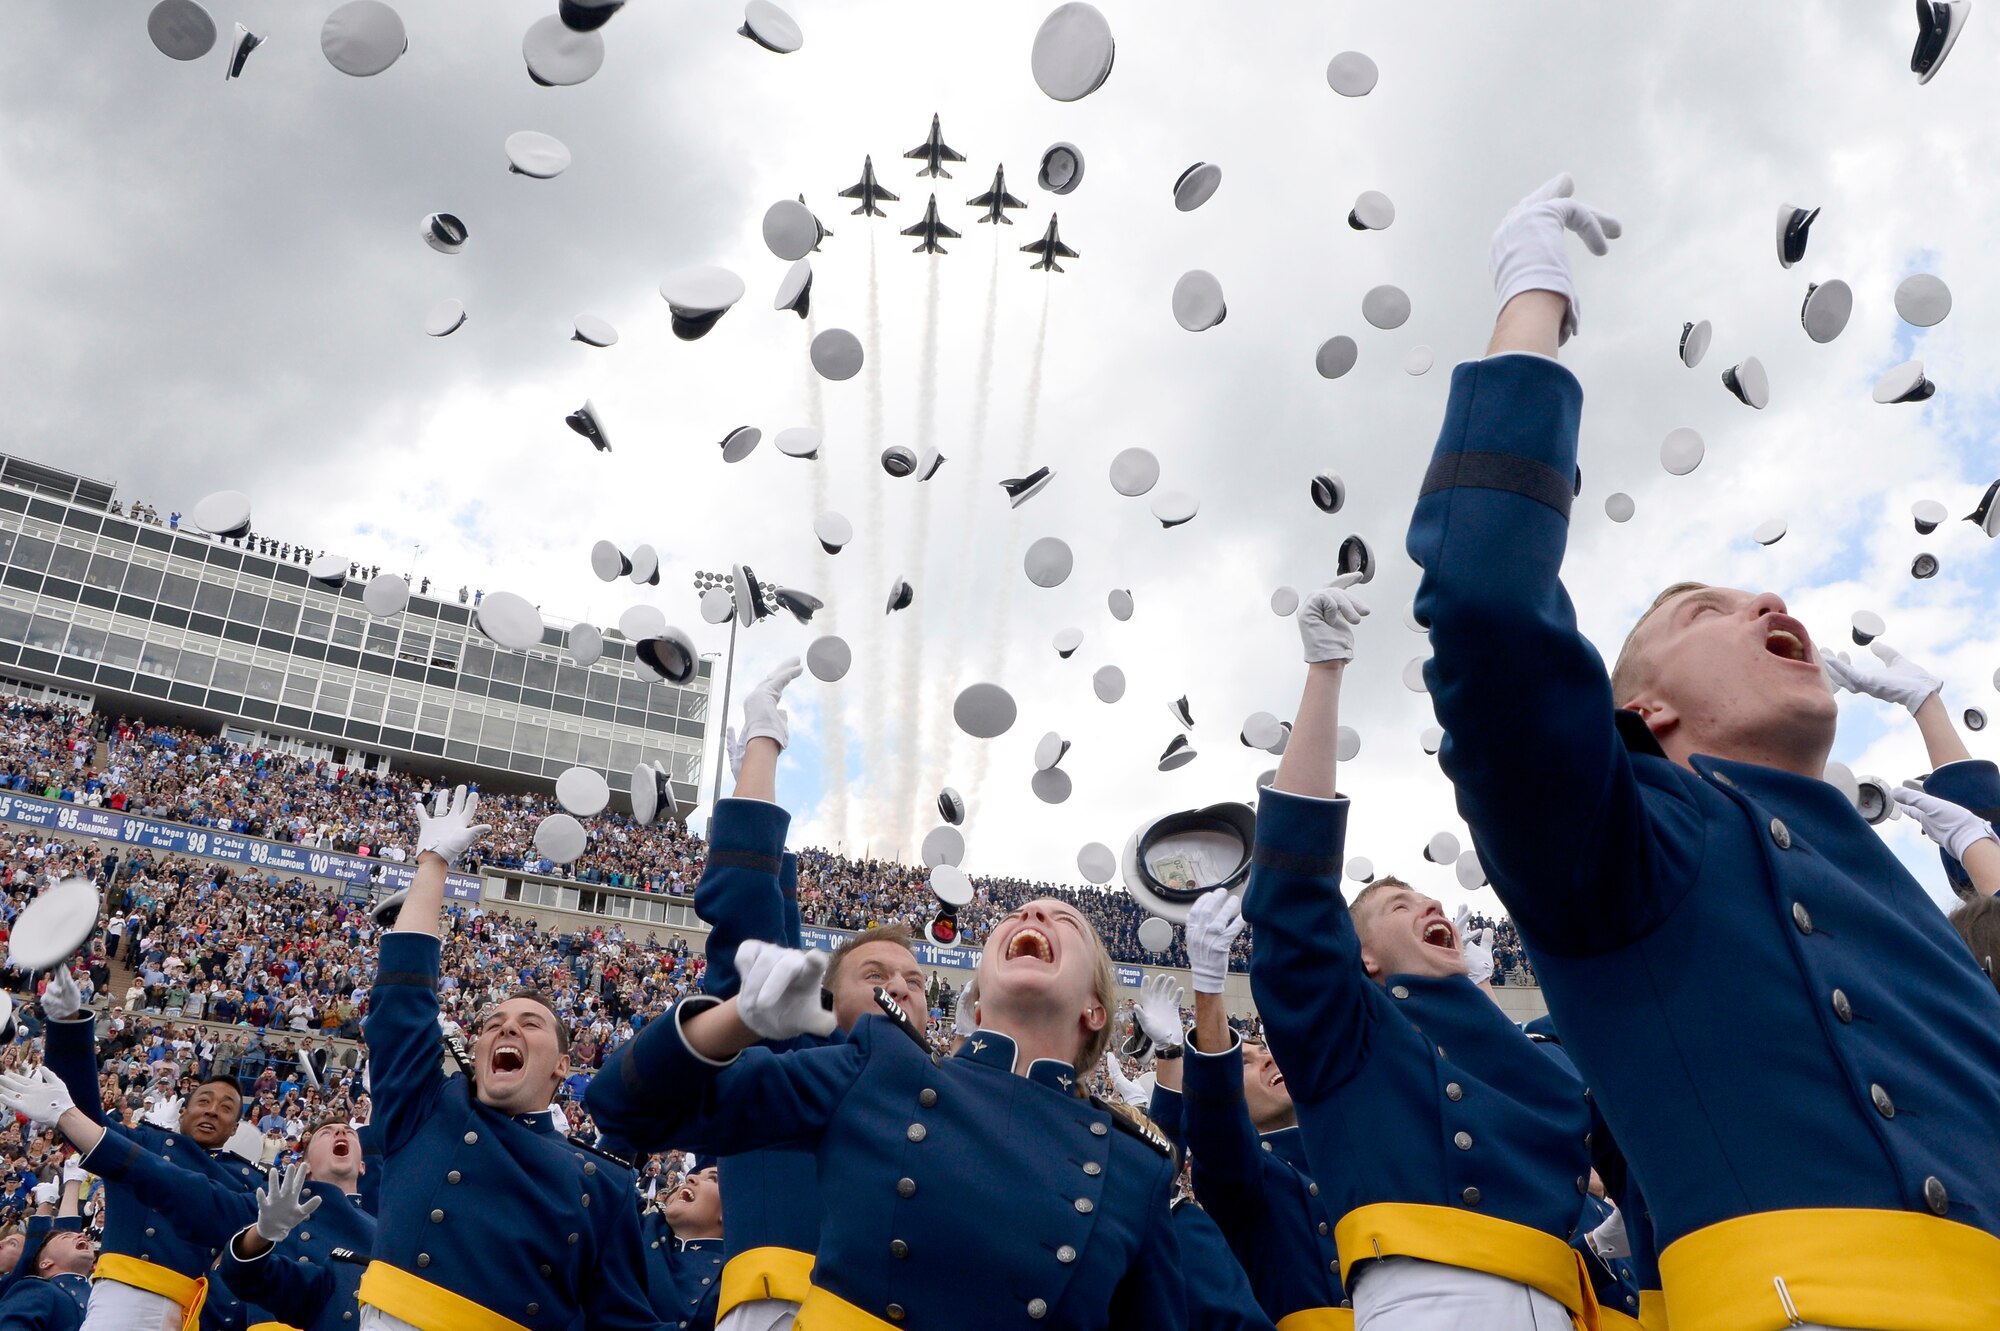 U.S. Air Force Academy Class of 2019 graduates toss their hats into the sky